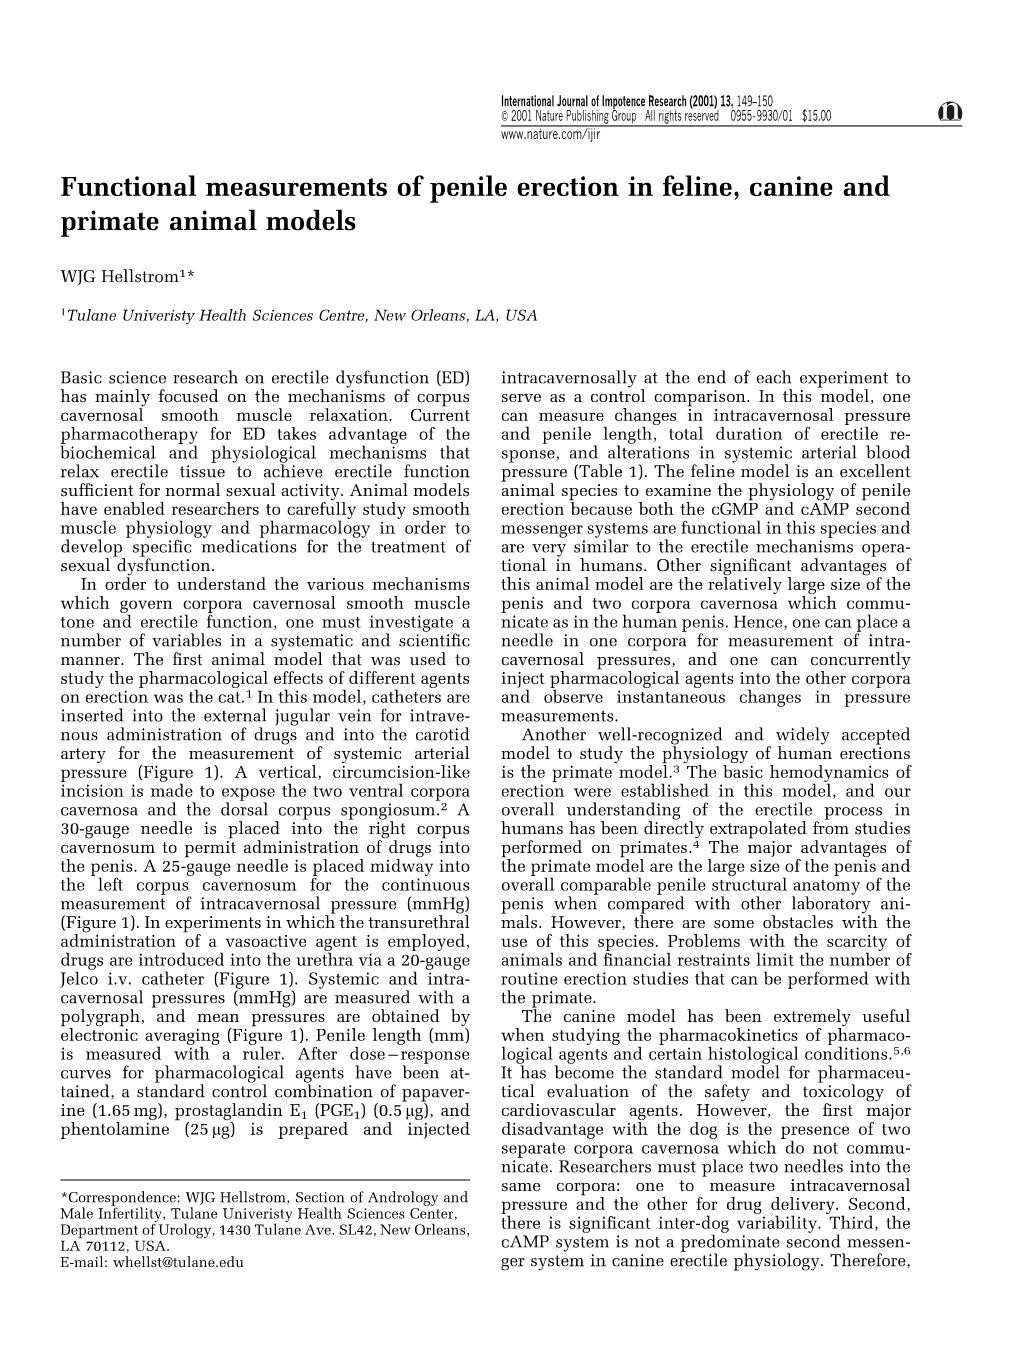 Functional Measurements of Penile Erection in Feline, Canine and Primate Animal Models